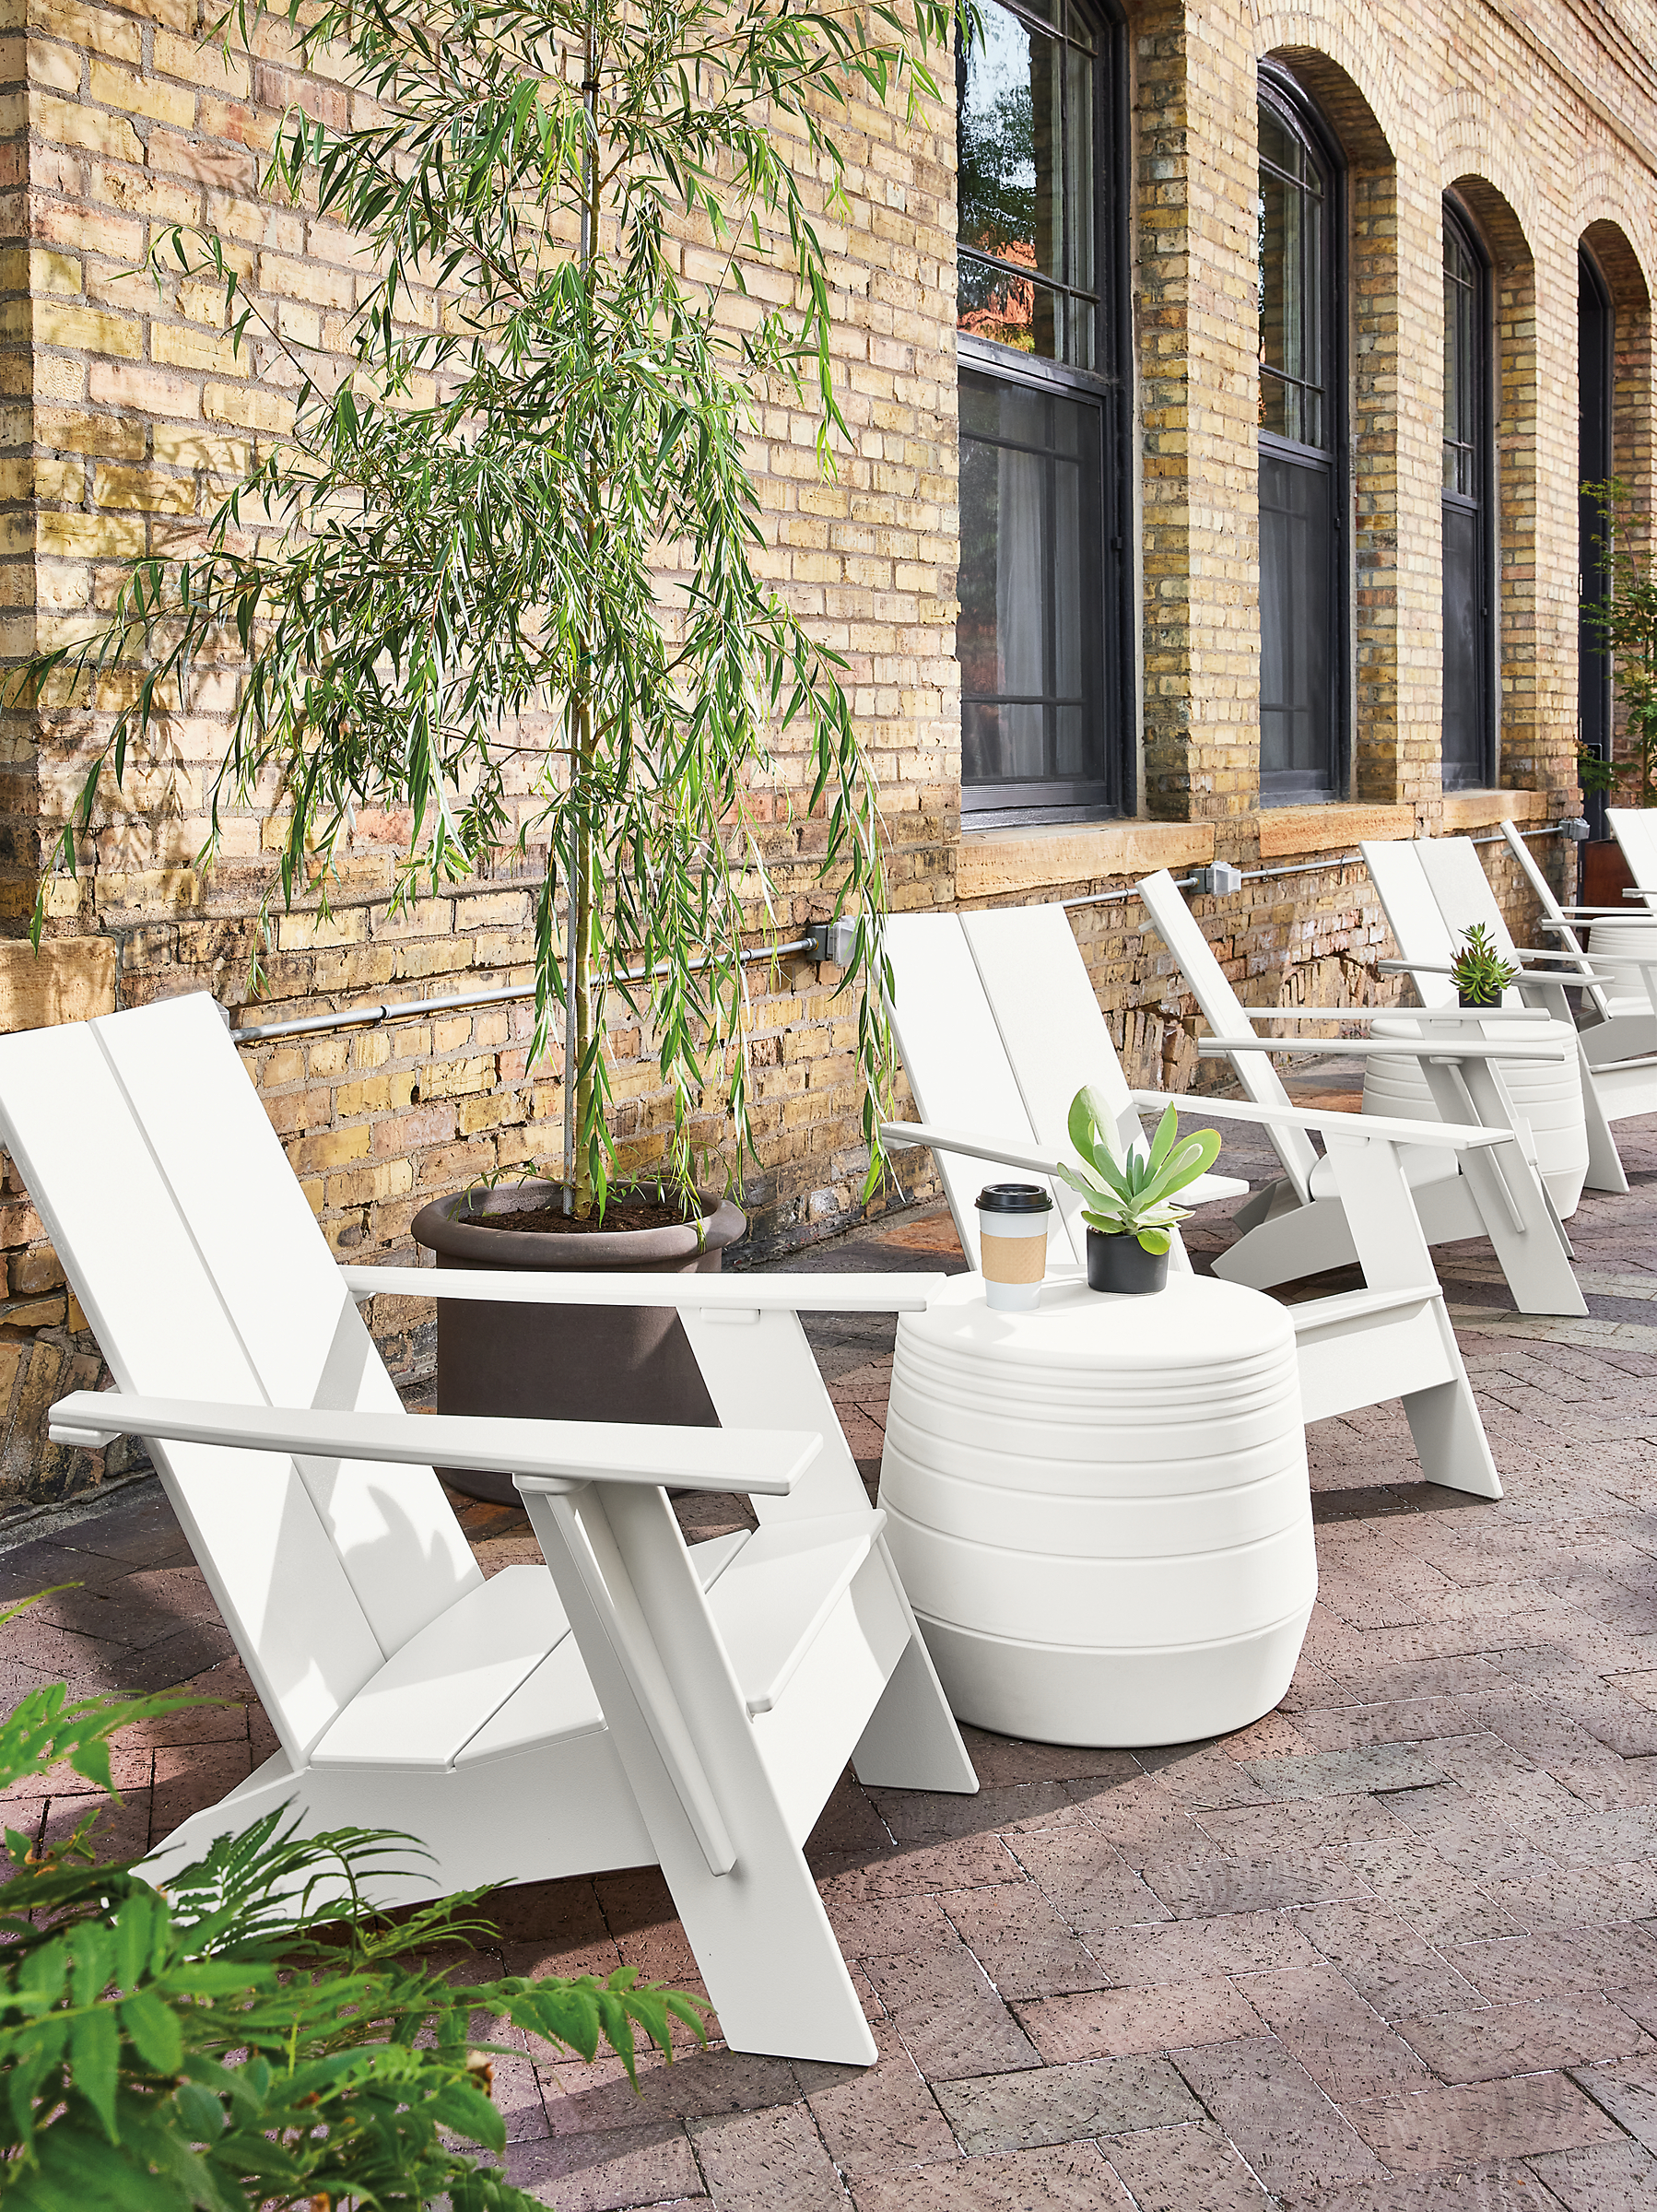 Outdoor space with emmet chairs in white, cusp stools in white, gilyard planters.